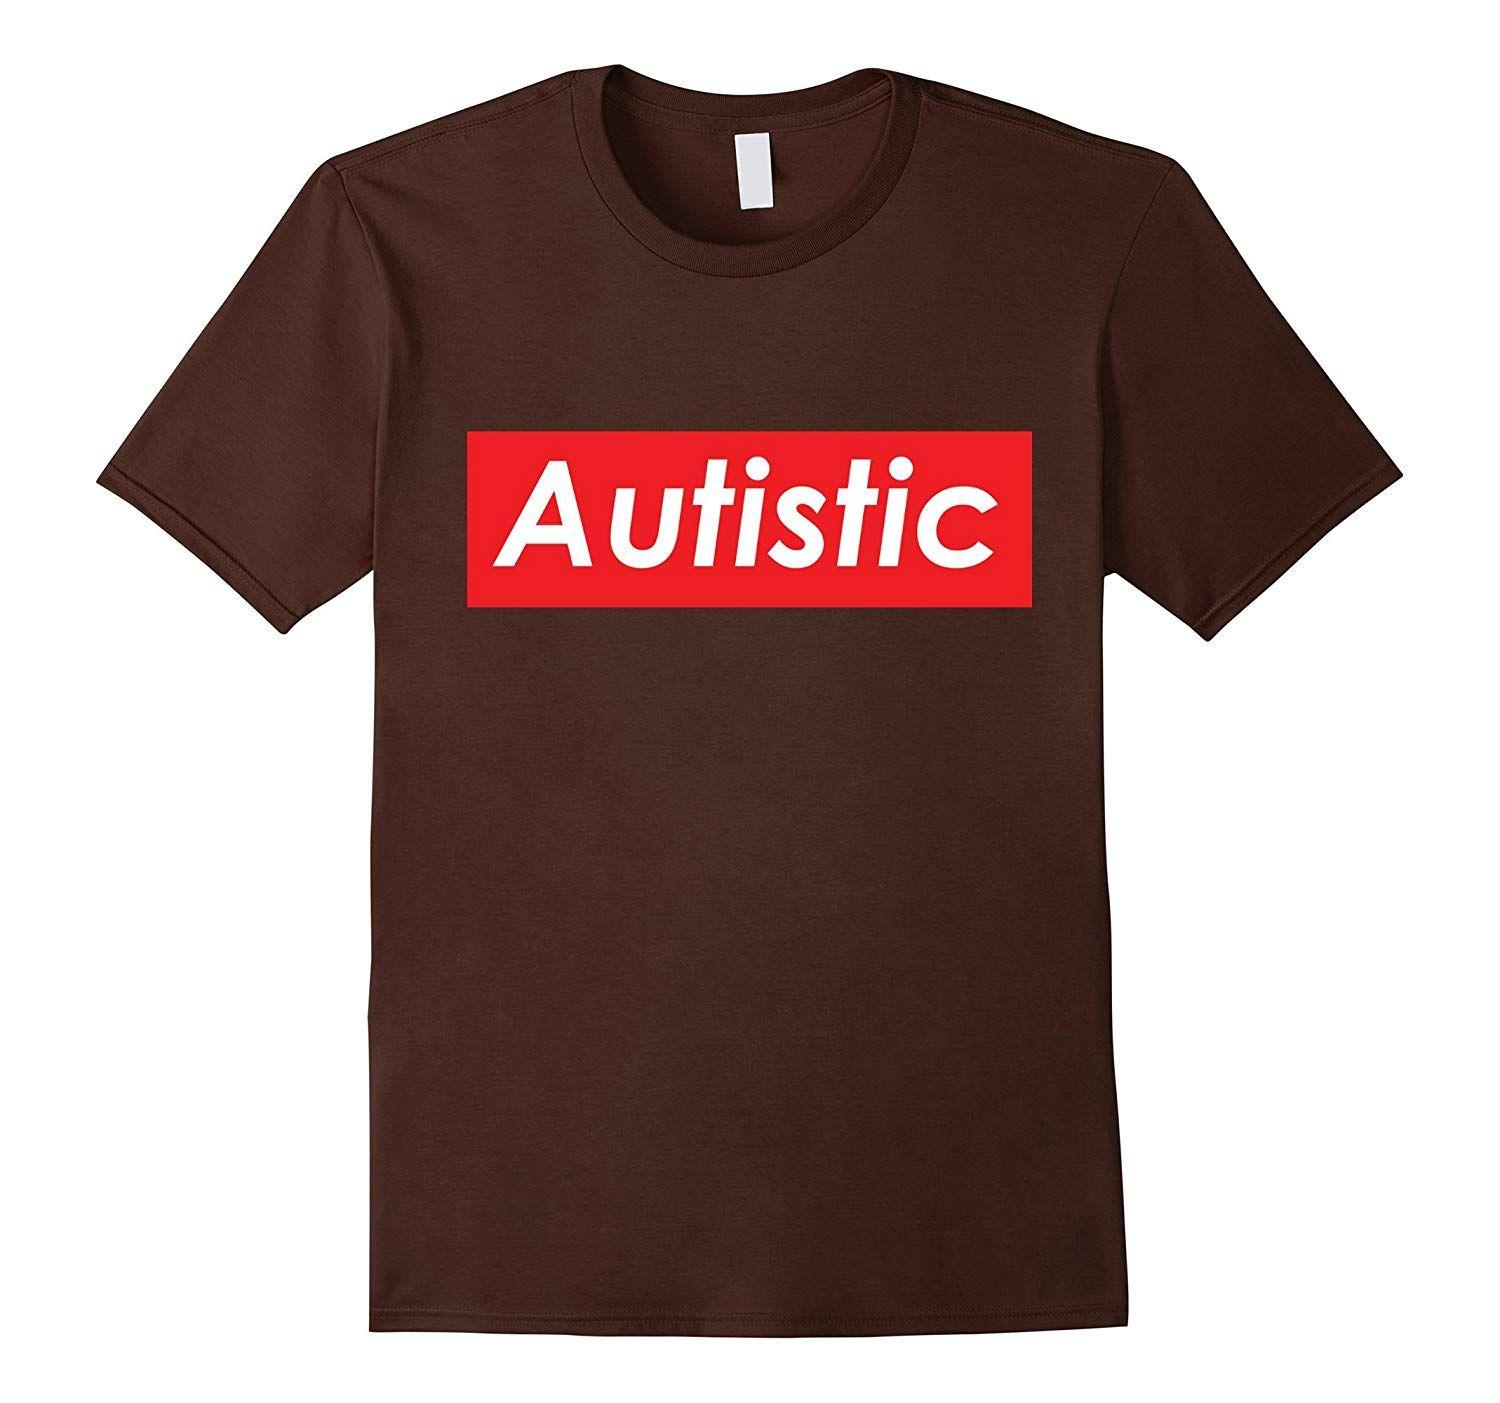 White and Red Box Logo - Amazon.com: Autistic Red Box Logo White Letters - I'm Autistic Shirt ...